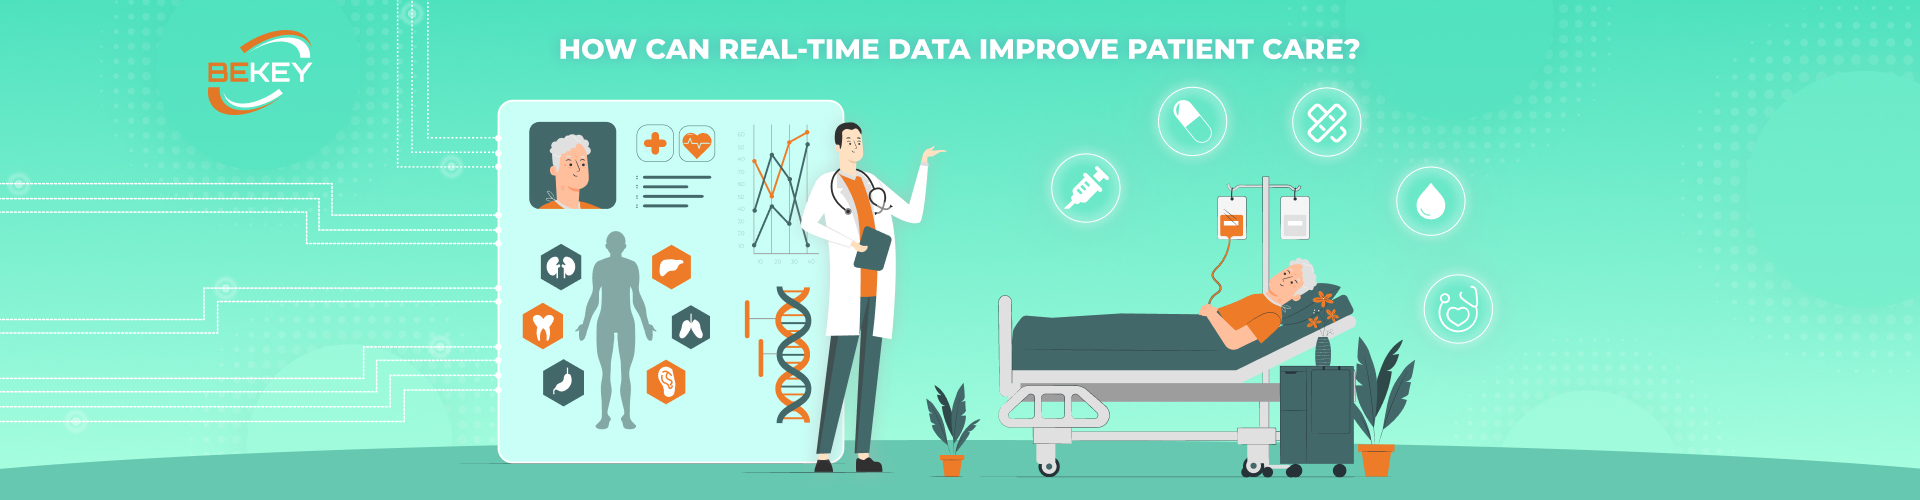 How Can Real-Time Data Improve Patient Care? - image